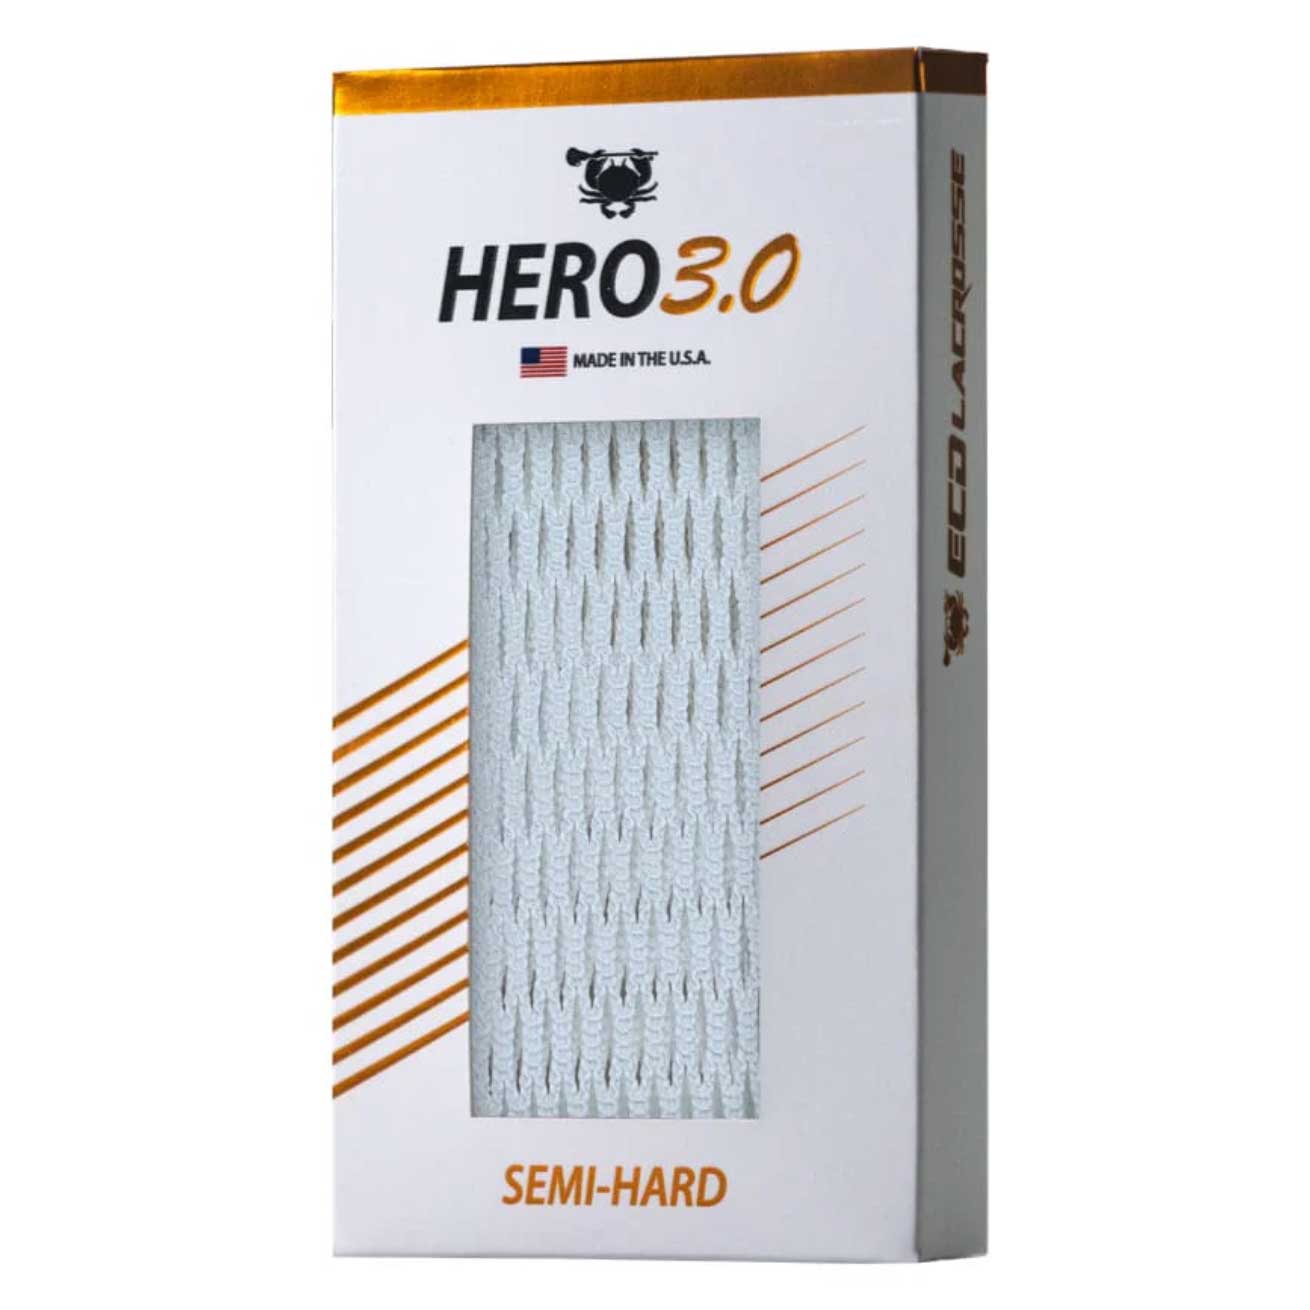 Picture of the white East Coast Dyes Hero 3.0 Semi-Hard Lacrosse Mesh